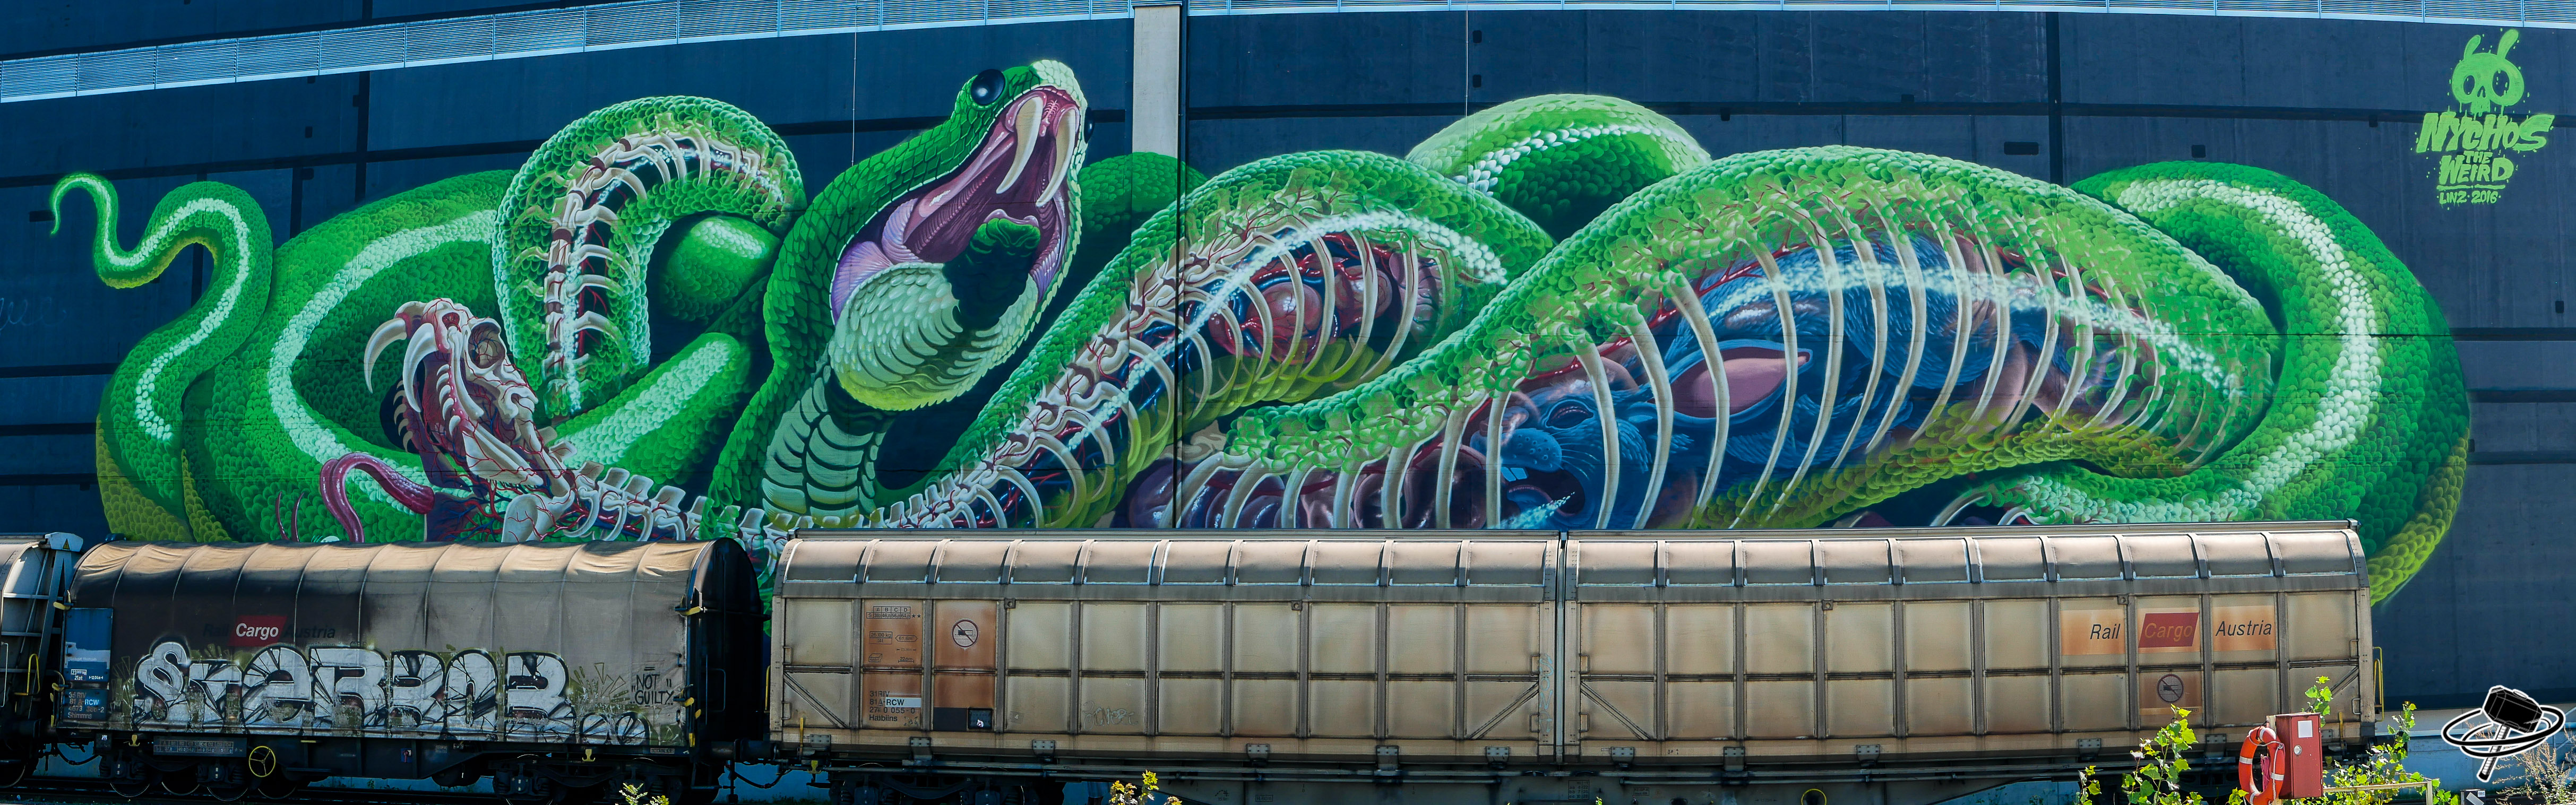 Translucent Snake by Nychos